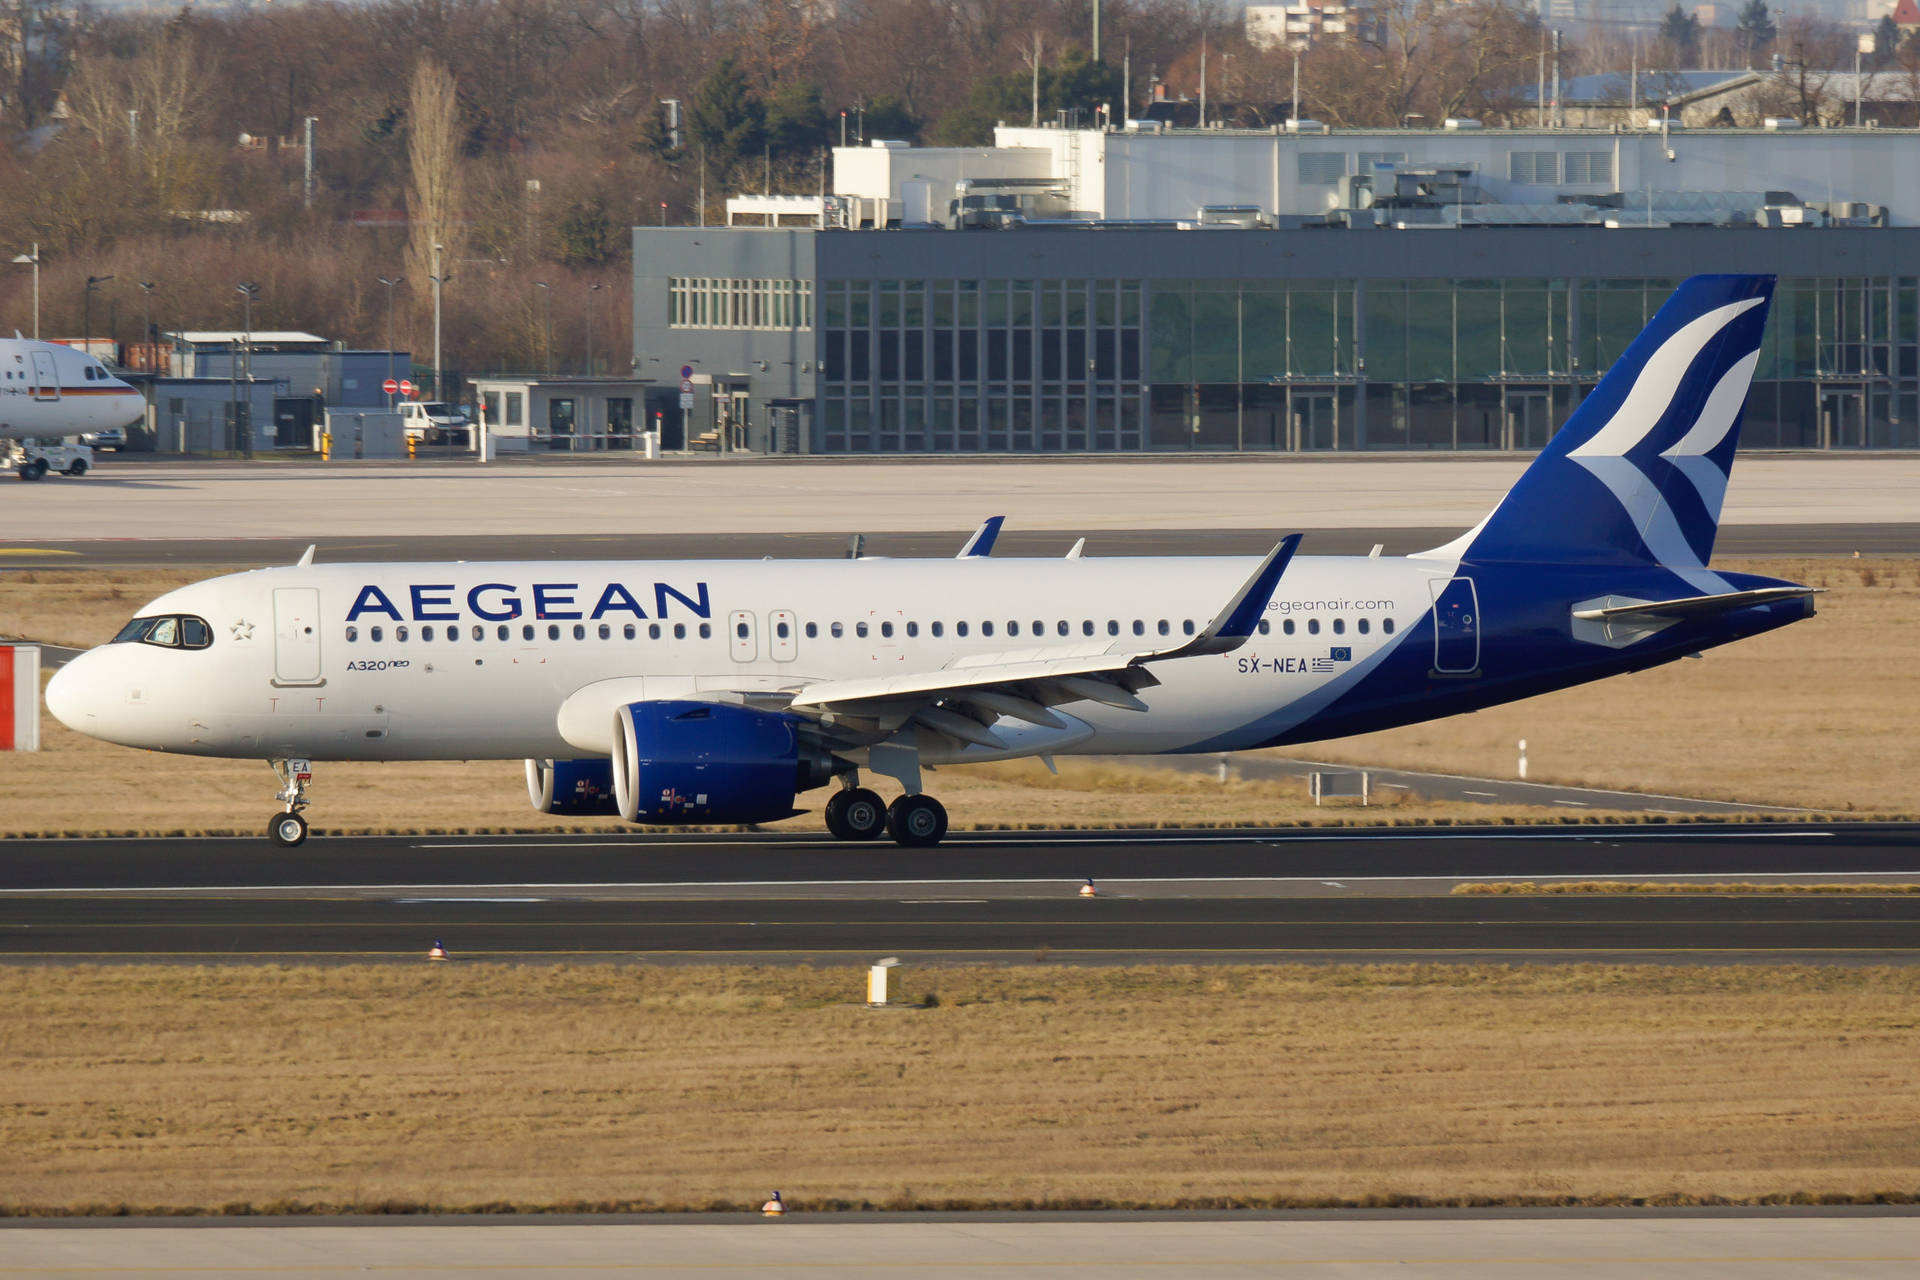 Aegean Airlines Airbus A320neo ready for takeoff on runway. Wallpaper